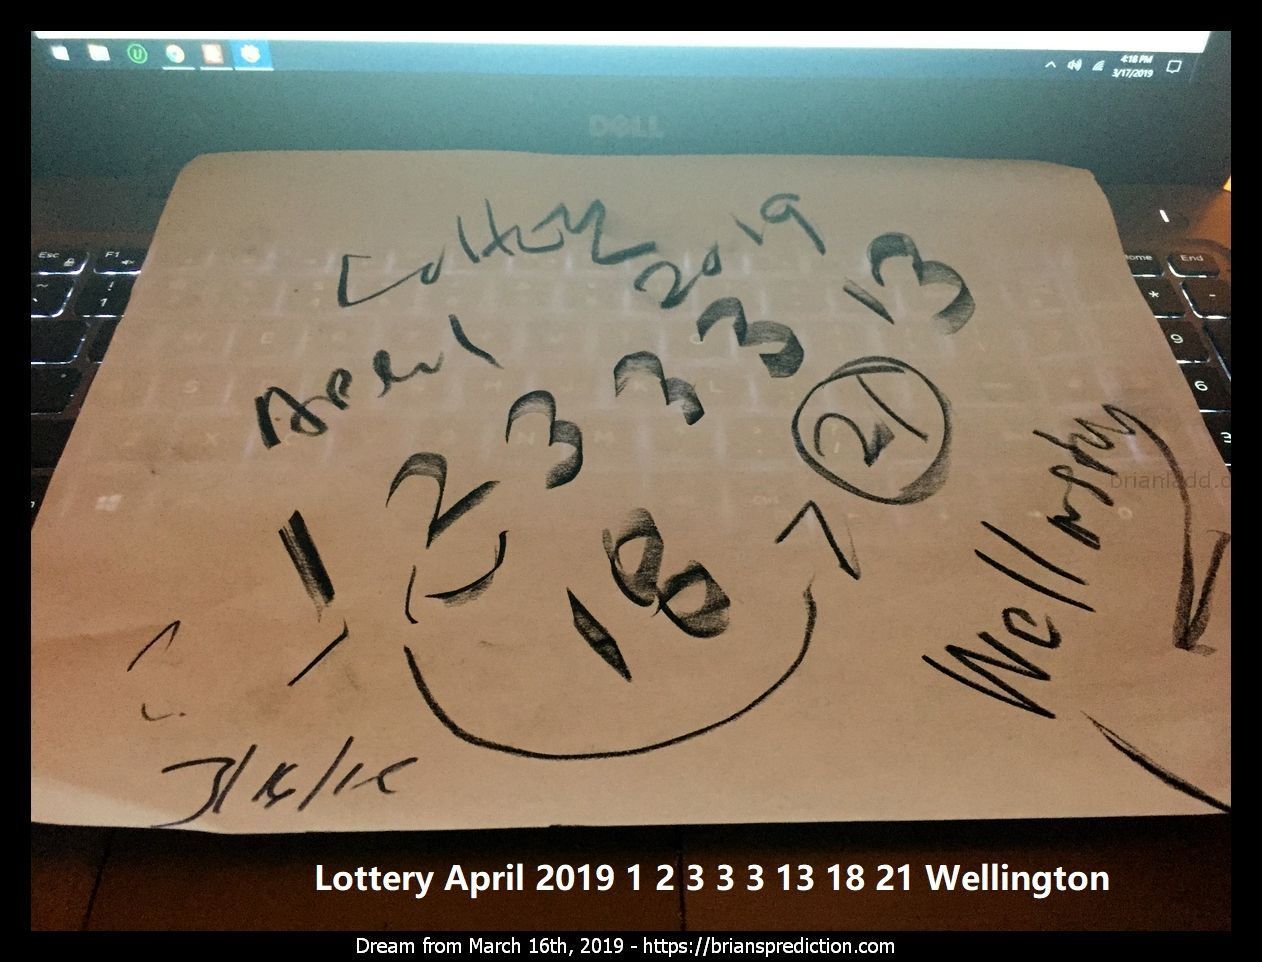 11785 16 March 2019 1 - Lottery April 2019 1 2 3 3 3 13 18 21 Wellington  Dream Number 11785 16 March 2019 1 Psychic Pre...
Lottery April 2019 1 2 3 3 3 13 18 21 Wellington  Dream Number 11785 16 March 2019 1 Psychic Prediction
